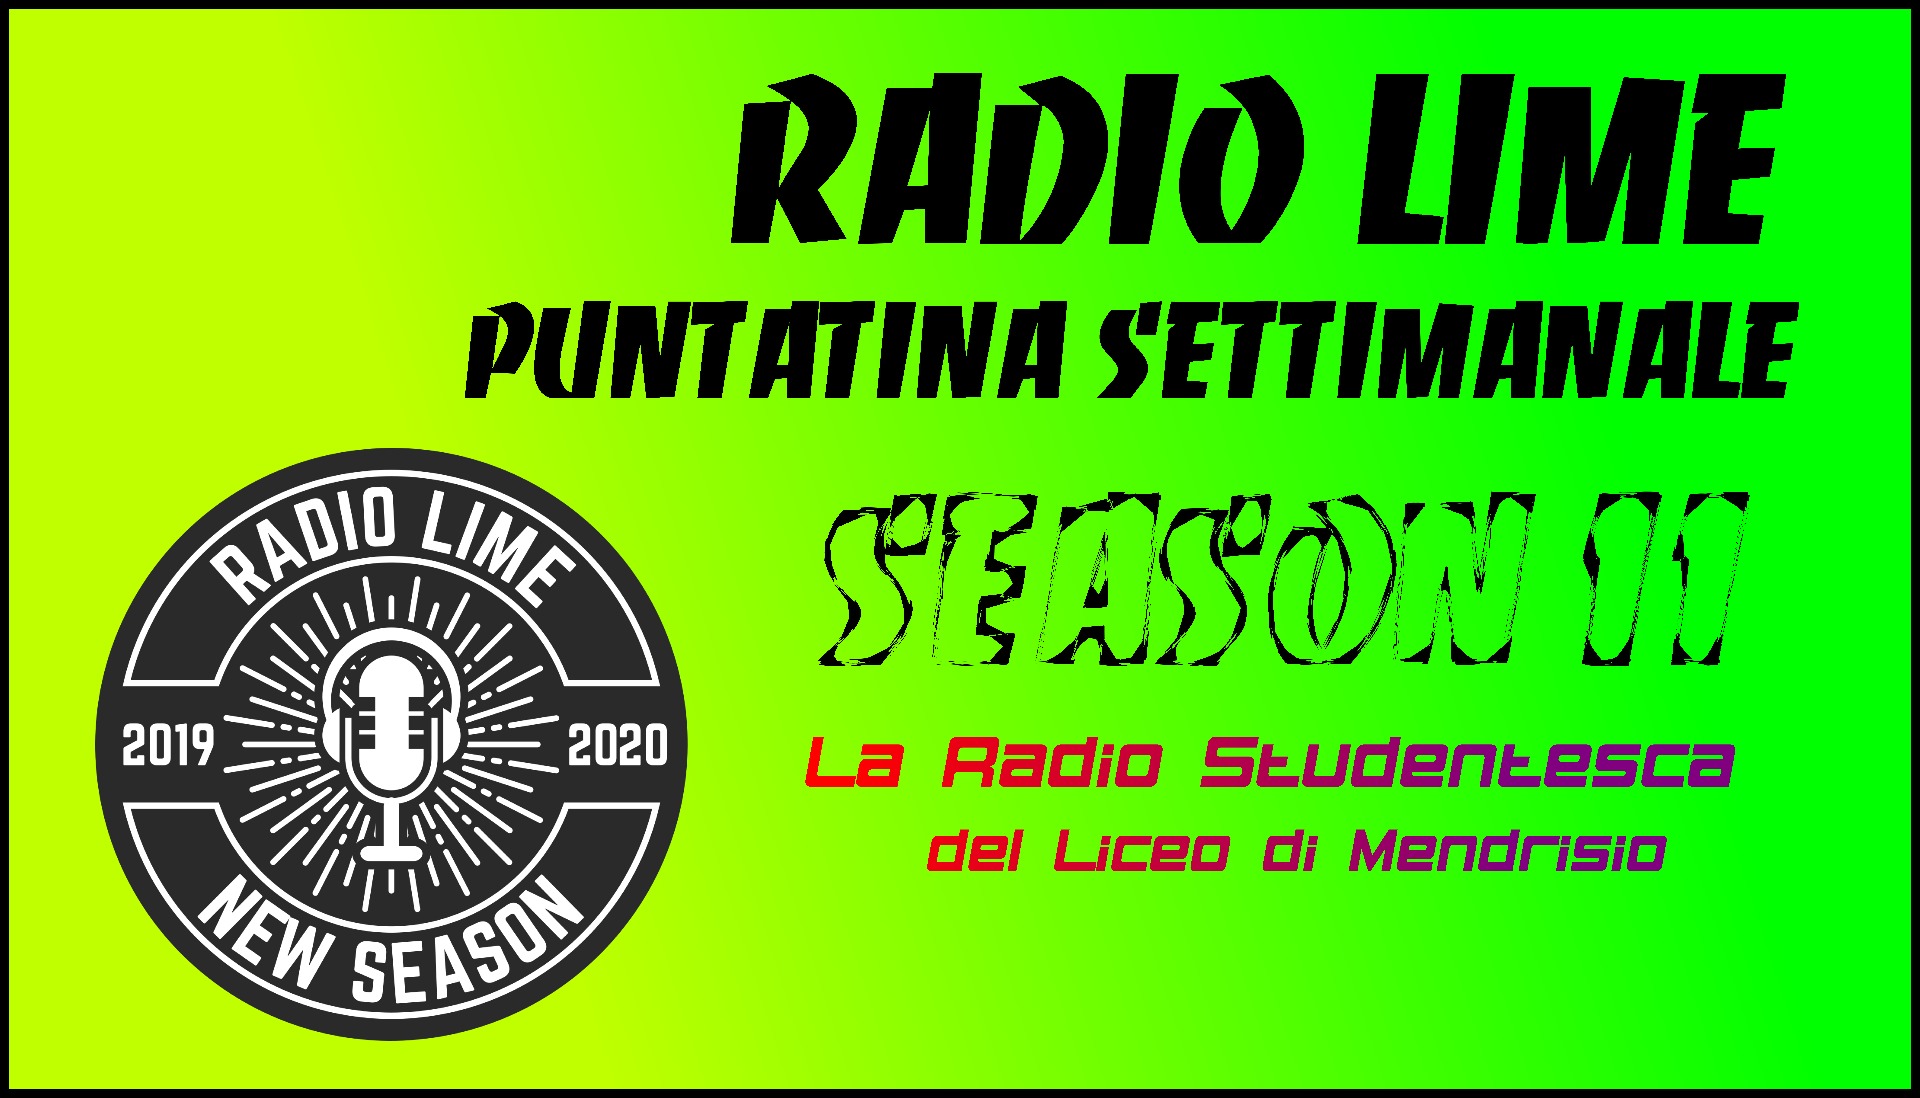 Laptop Radioing Session LIME - 30/01/2020